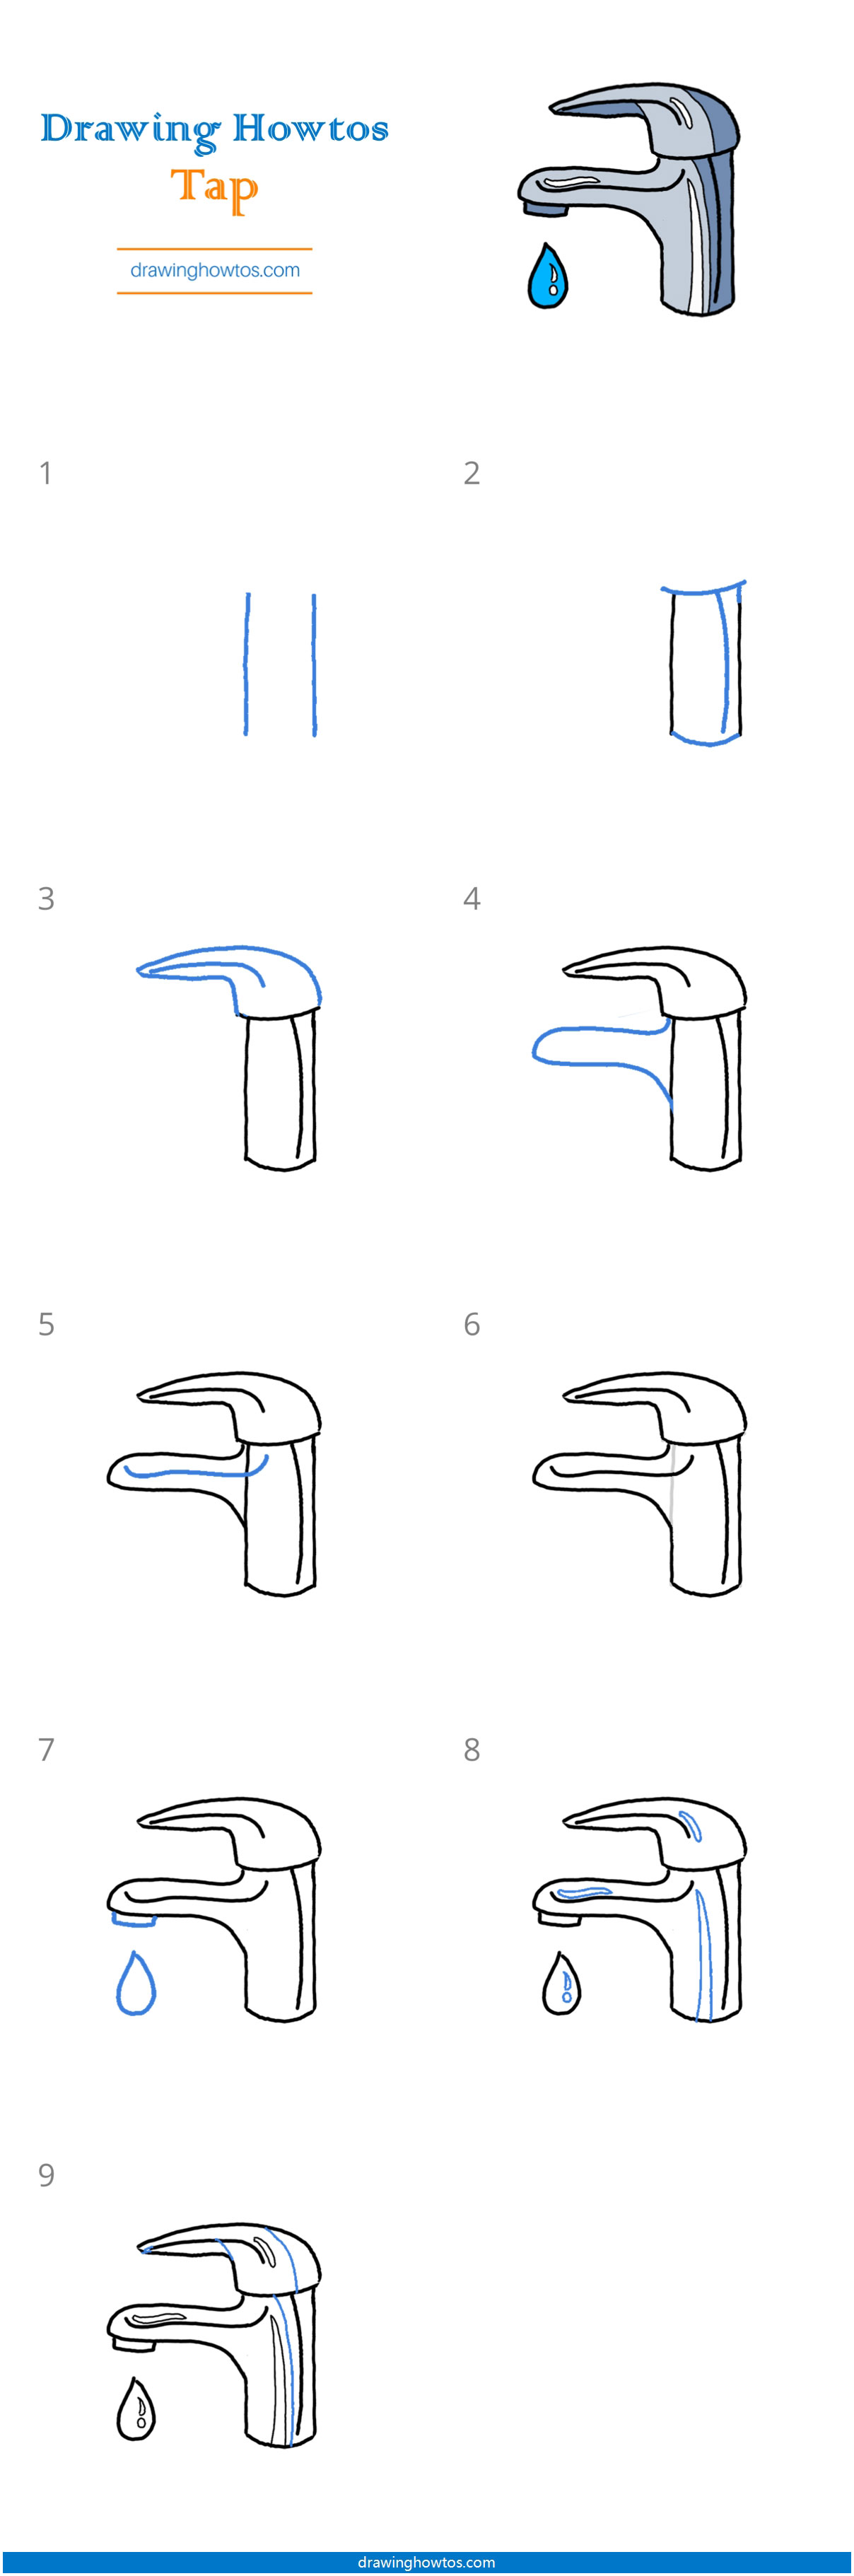 How to Draw a Water Tap Step by Step